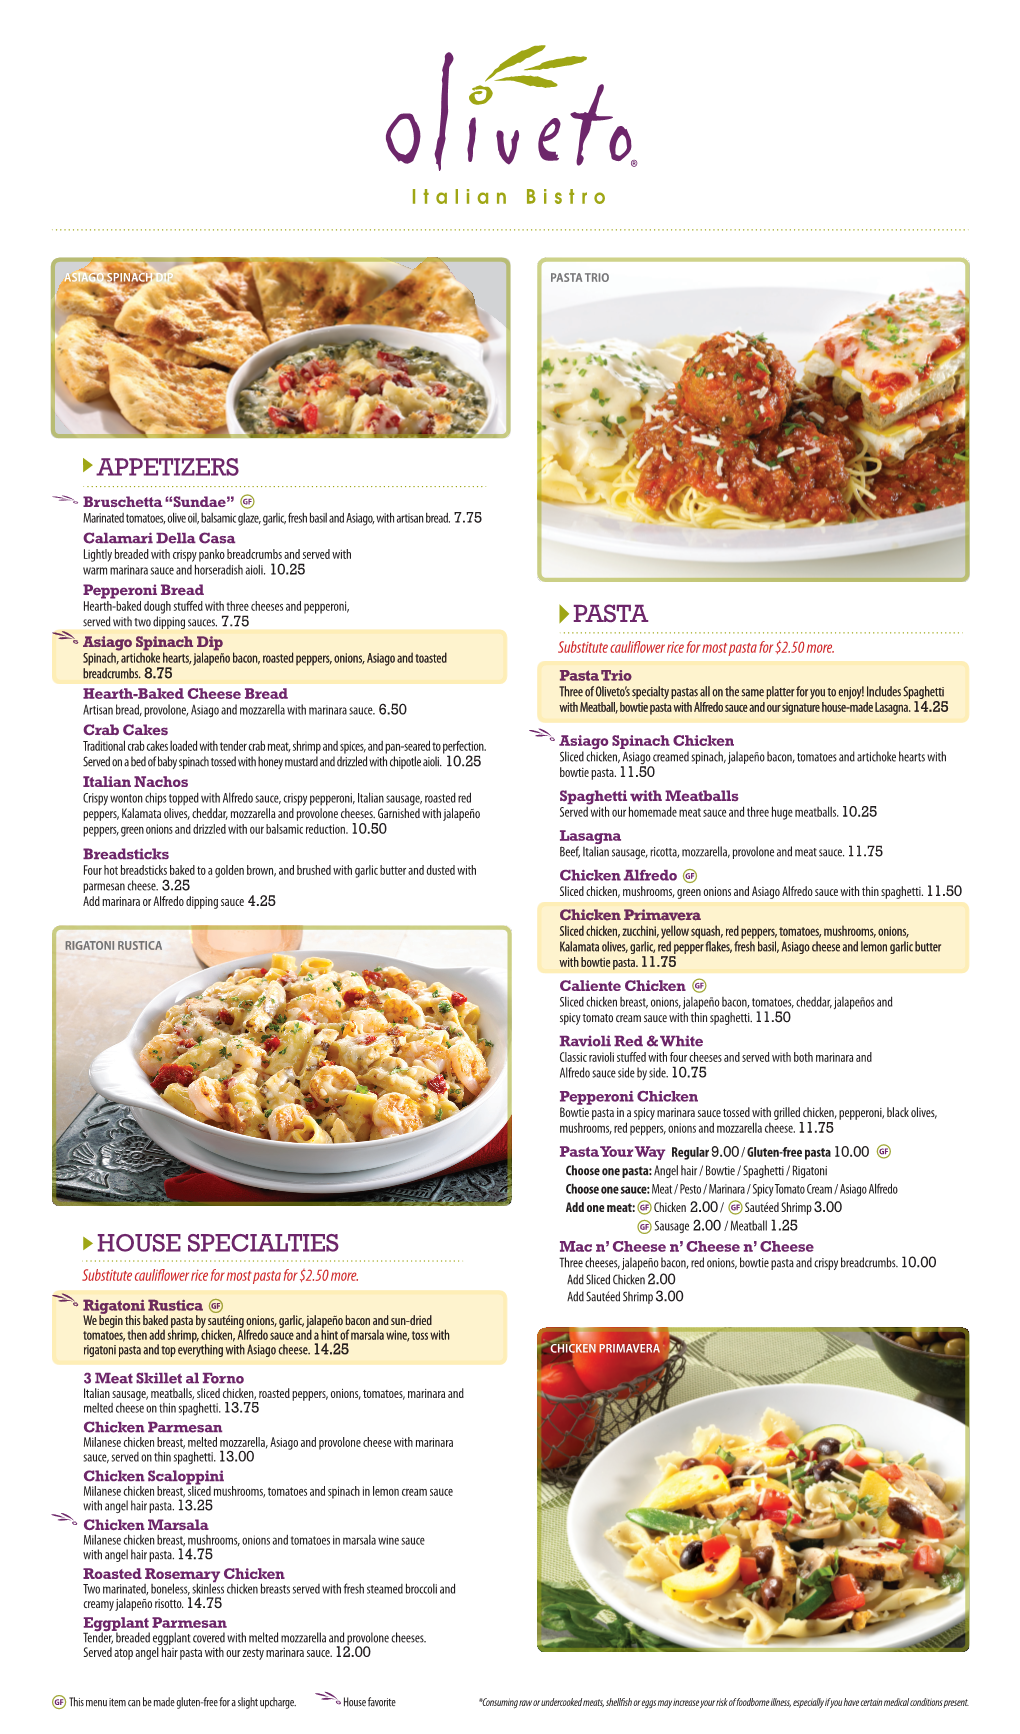 Appetizers Pasta House Specialties